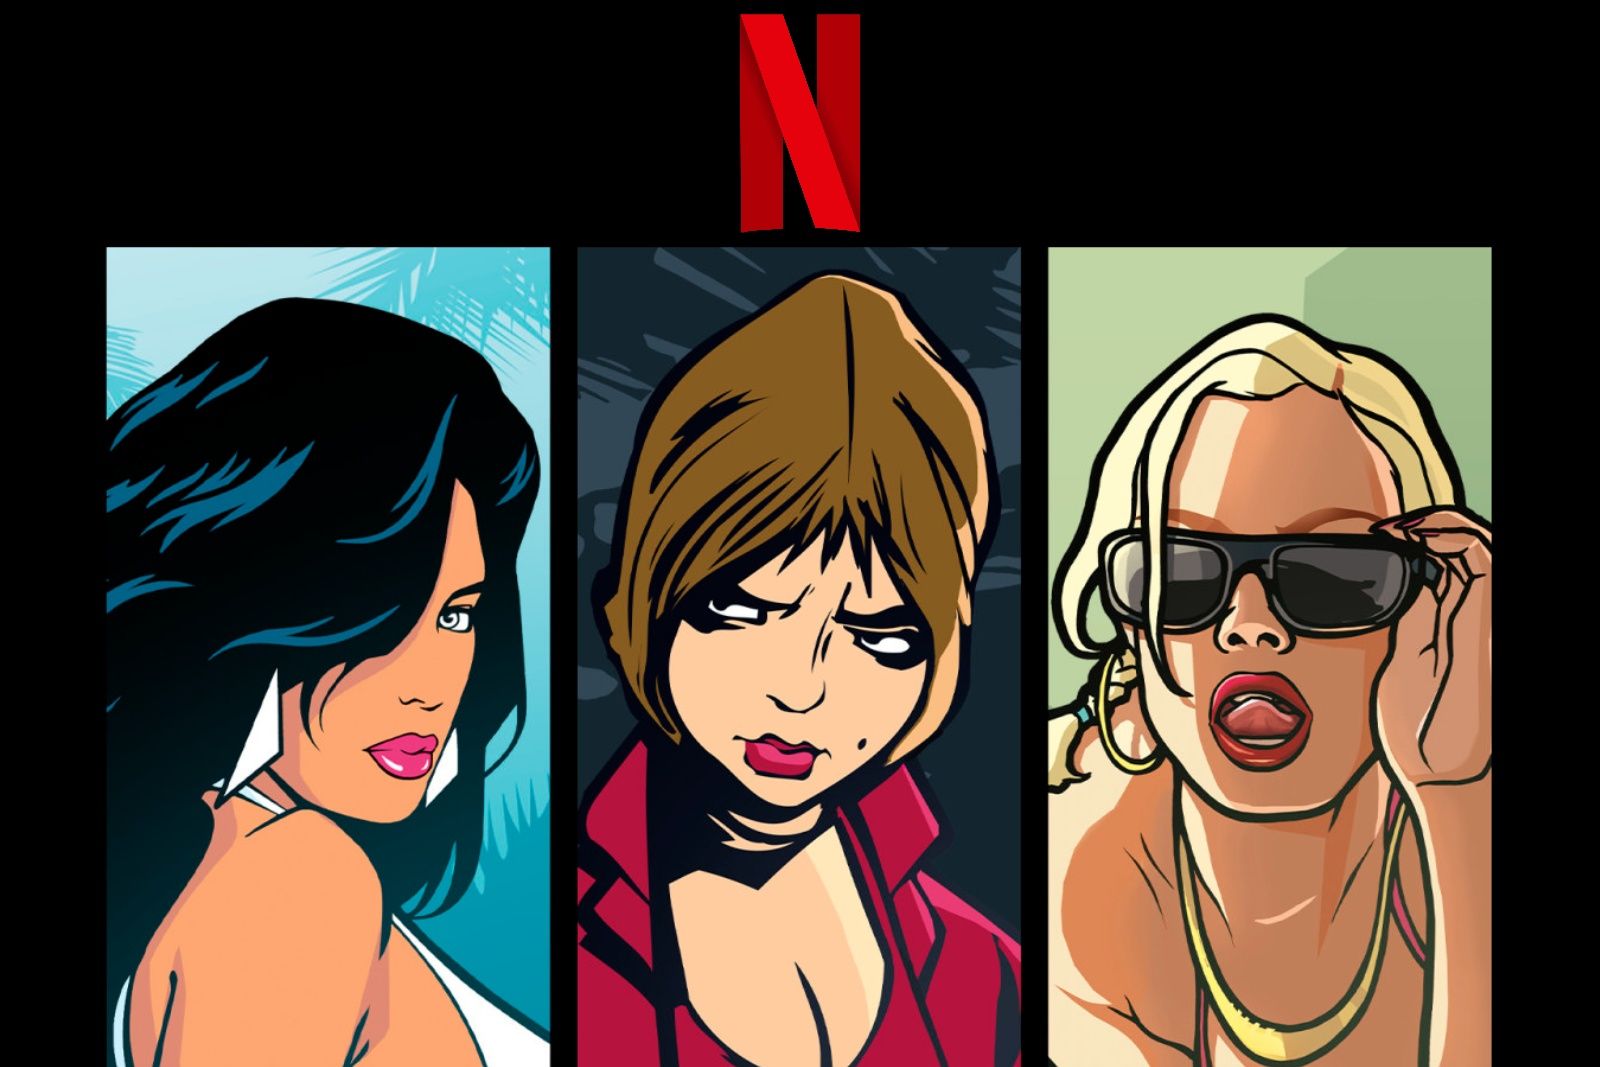 How to find and play Grand Theft Auto on Netflix when it releases